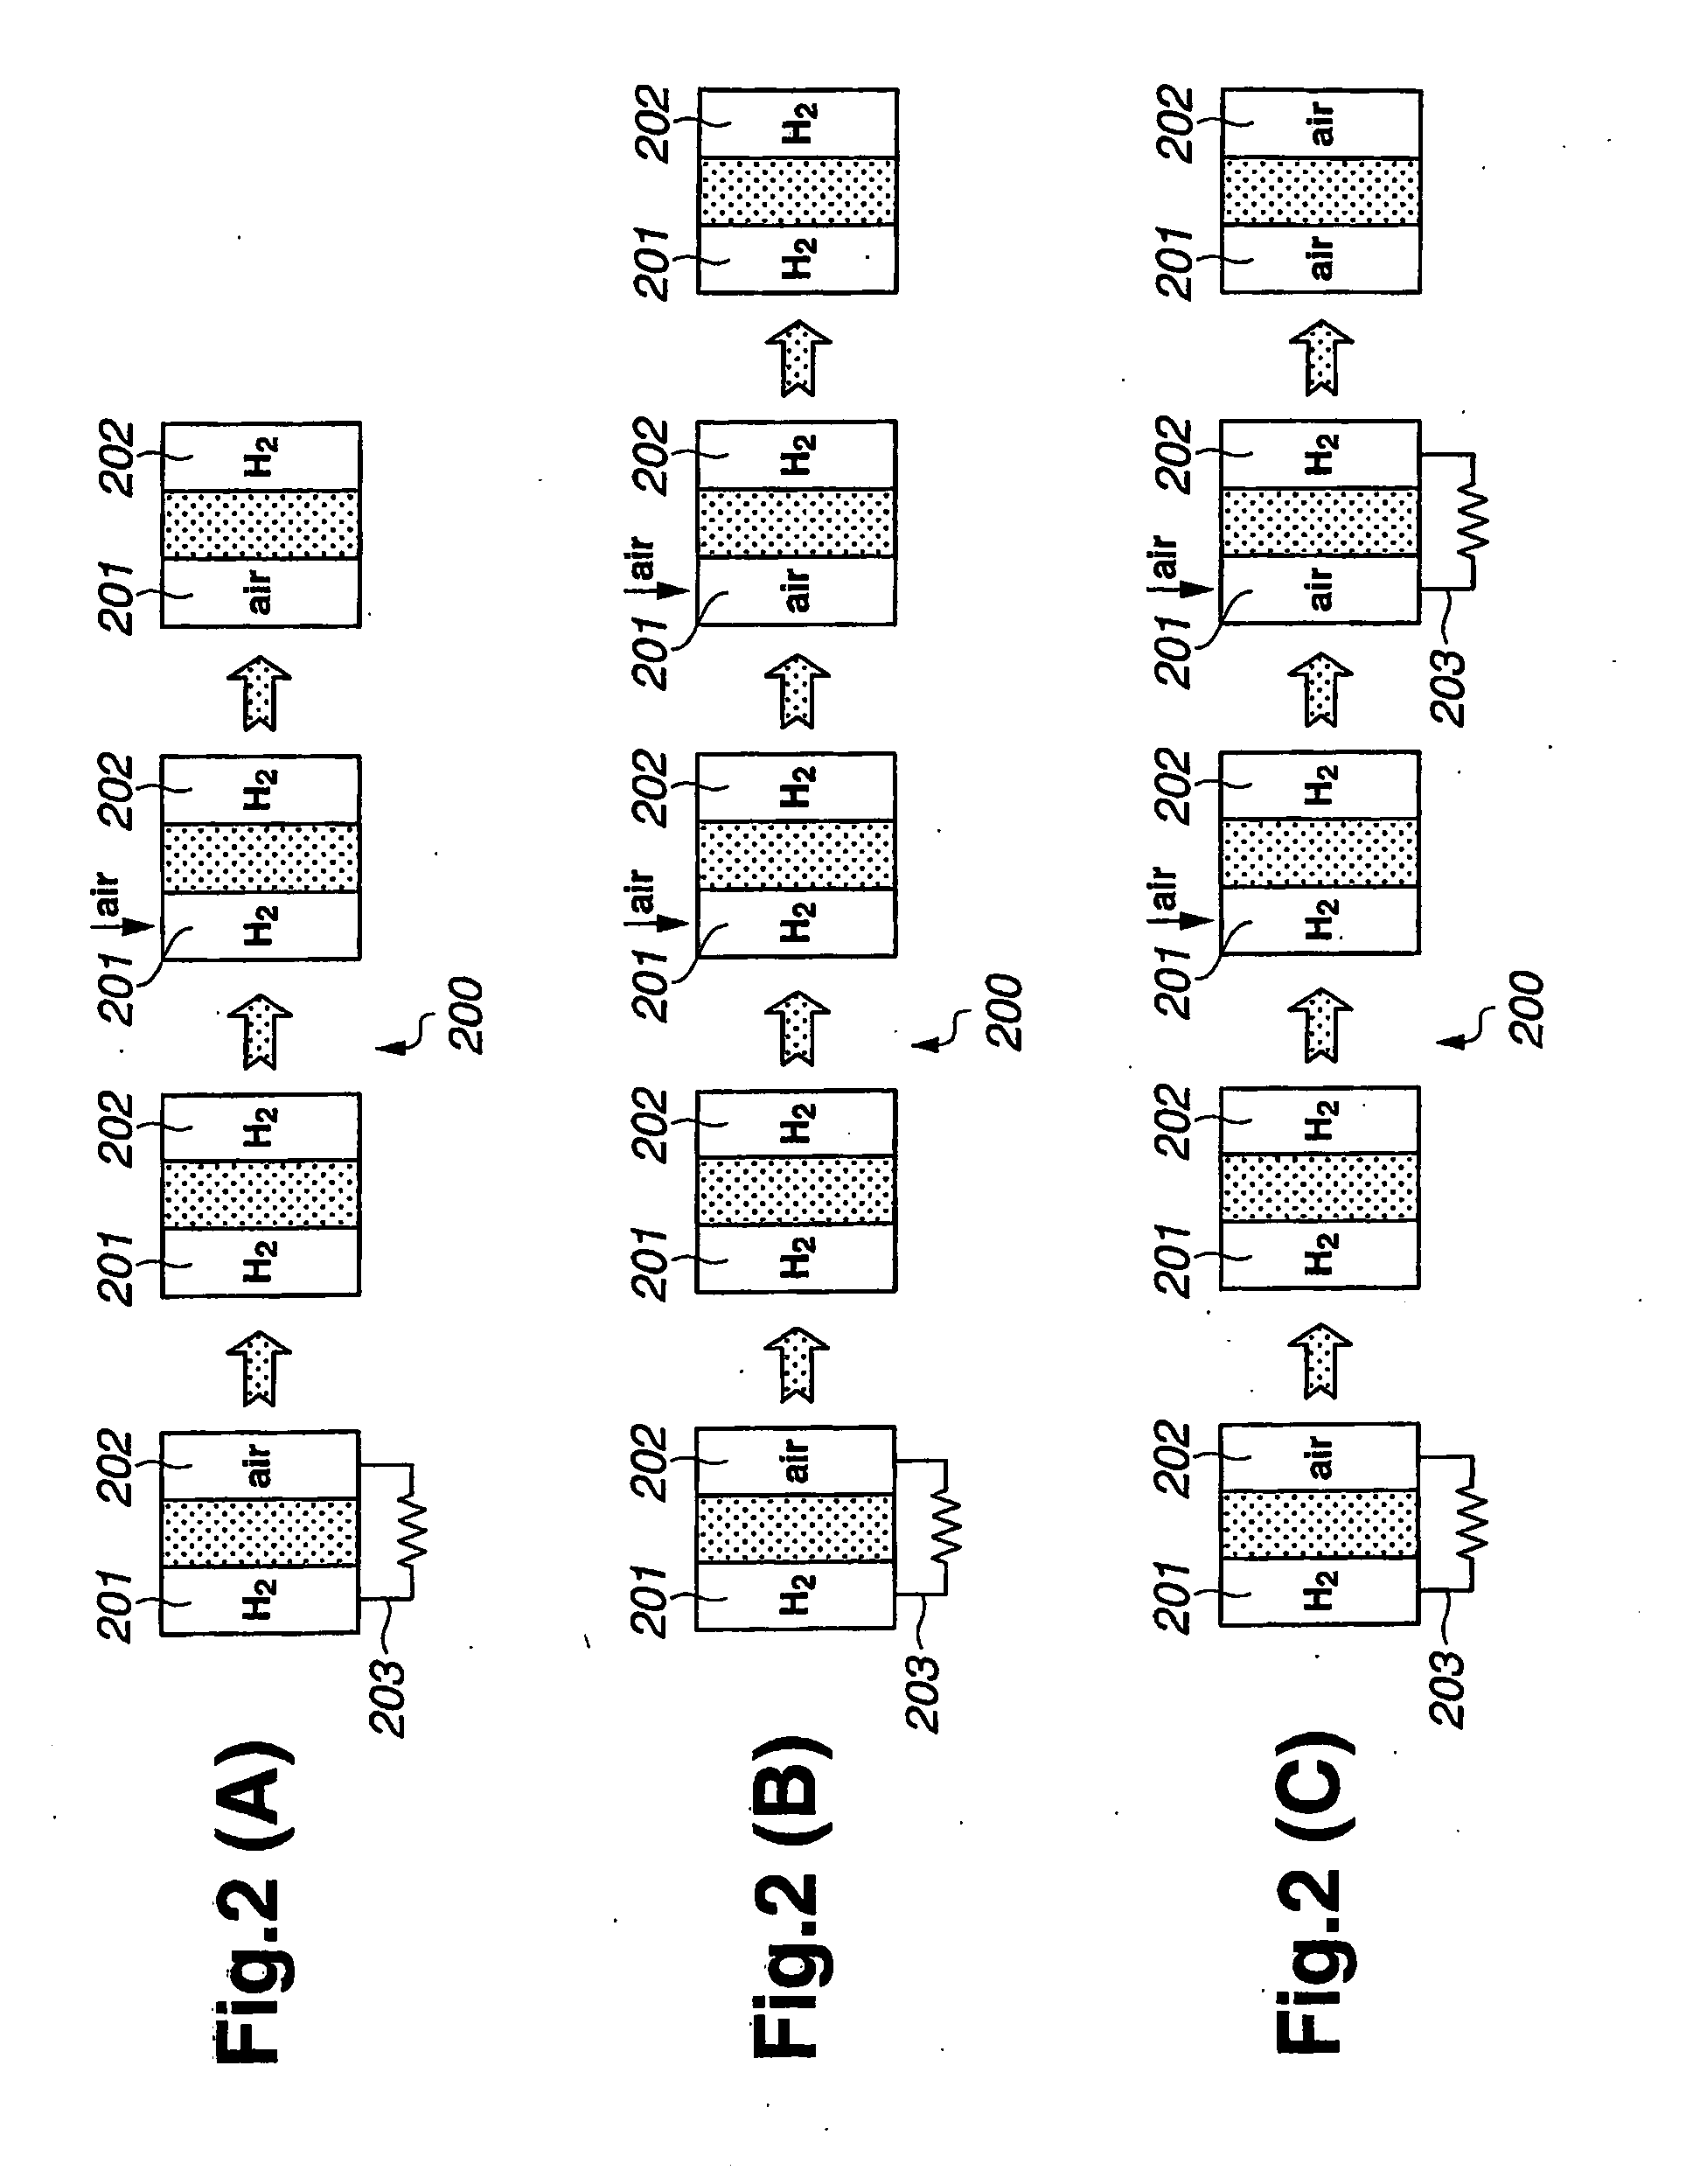 Fuel cell system with regeneration of electrode activity during start or stop